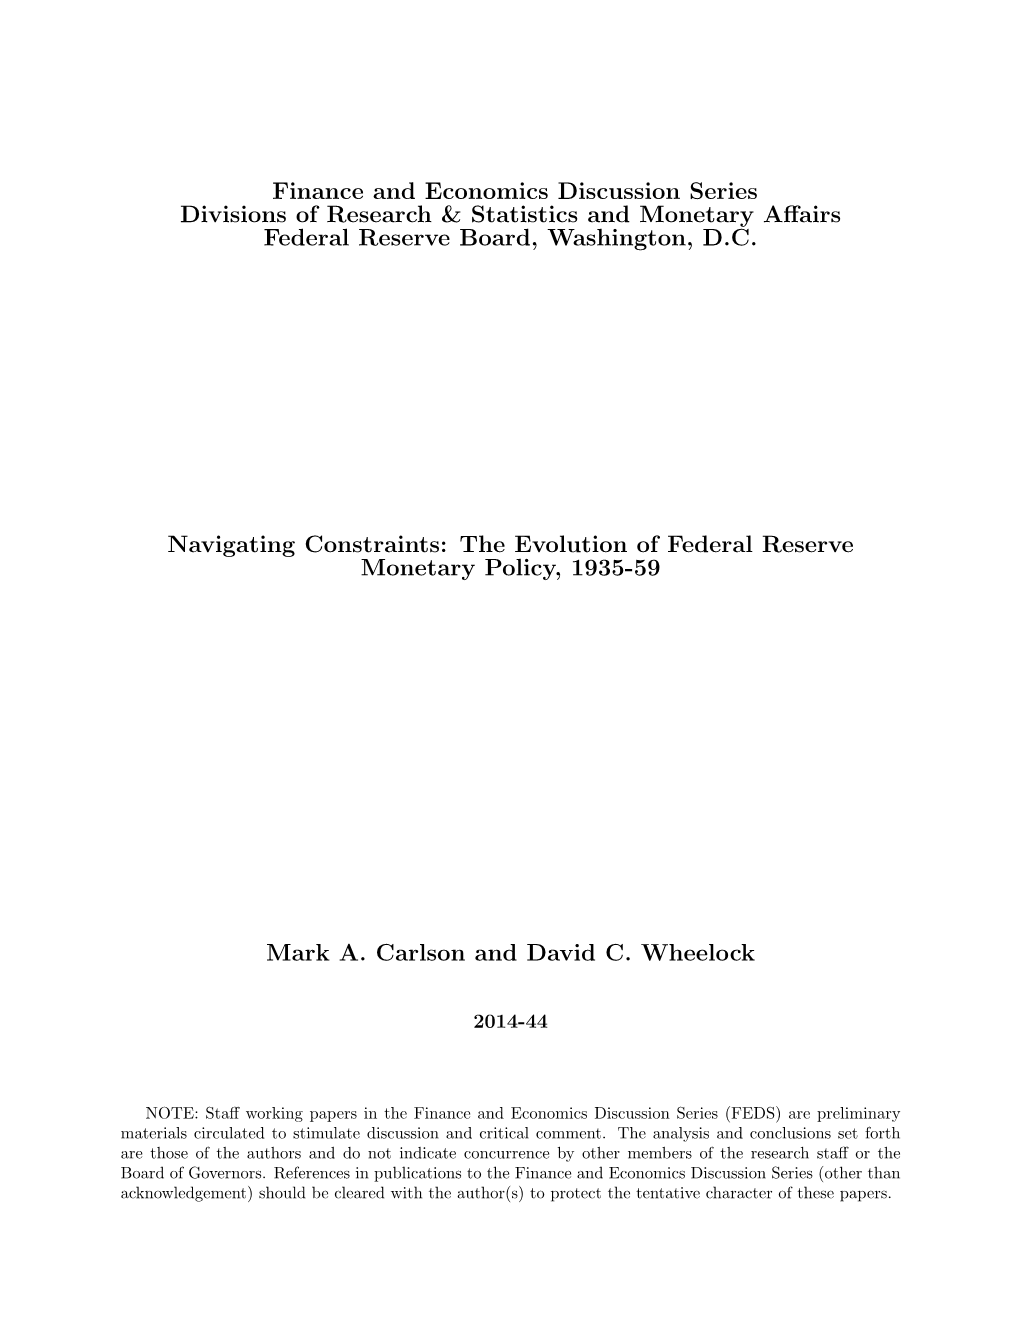 Navigating Constraints: the Evolution of Federal Reserve Monetary Policy, 1935-59